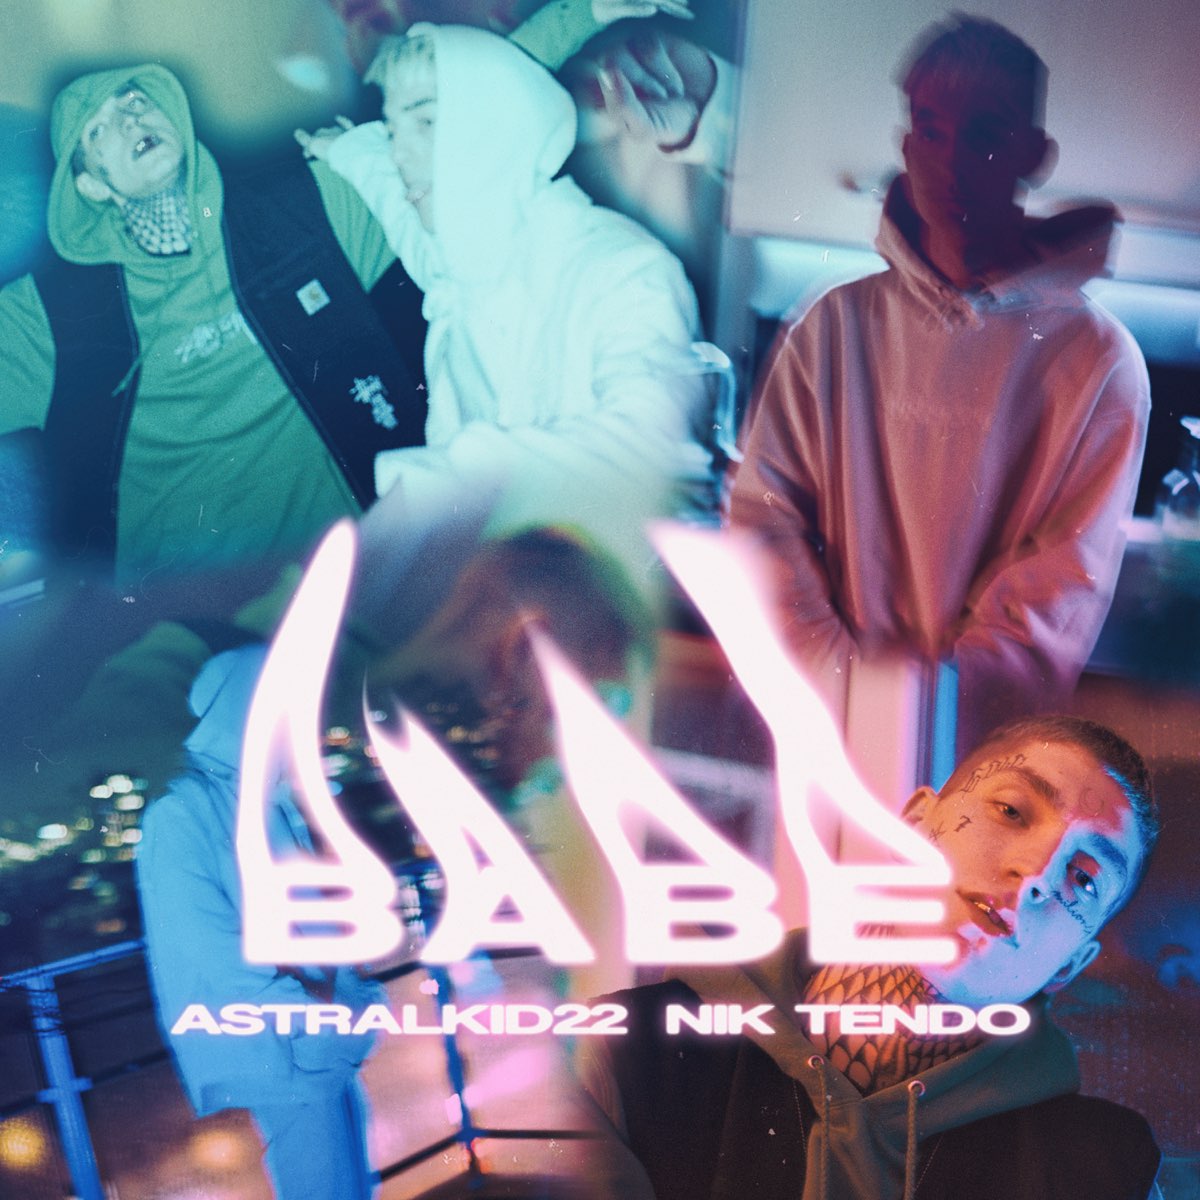 BABE (feat. Nik Tendo) - Single by AstralKid22 on Apple Music